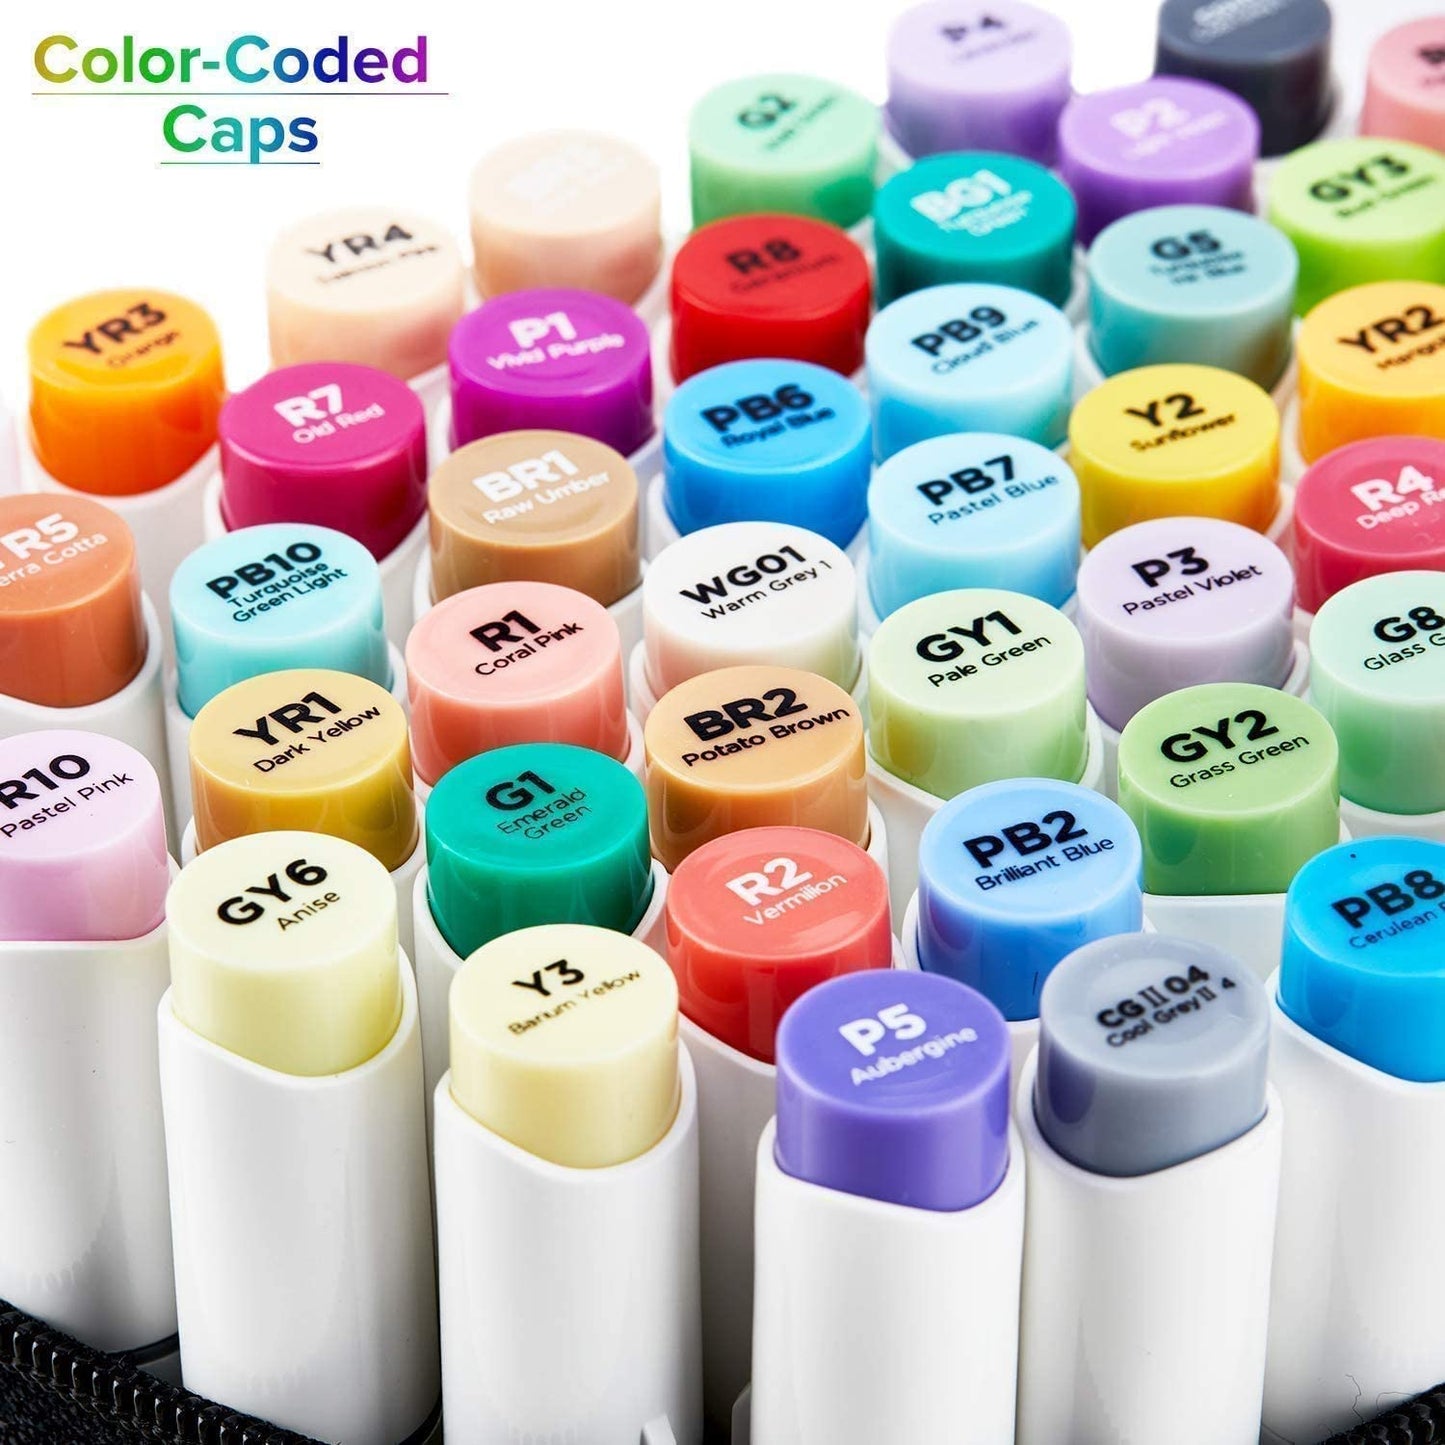 Ohuhu New 48 Pastel Colors Dual Tips Alcohol Art Markers